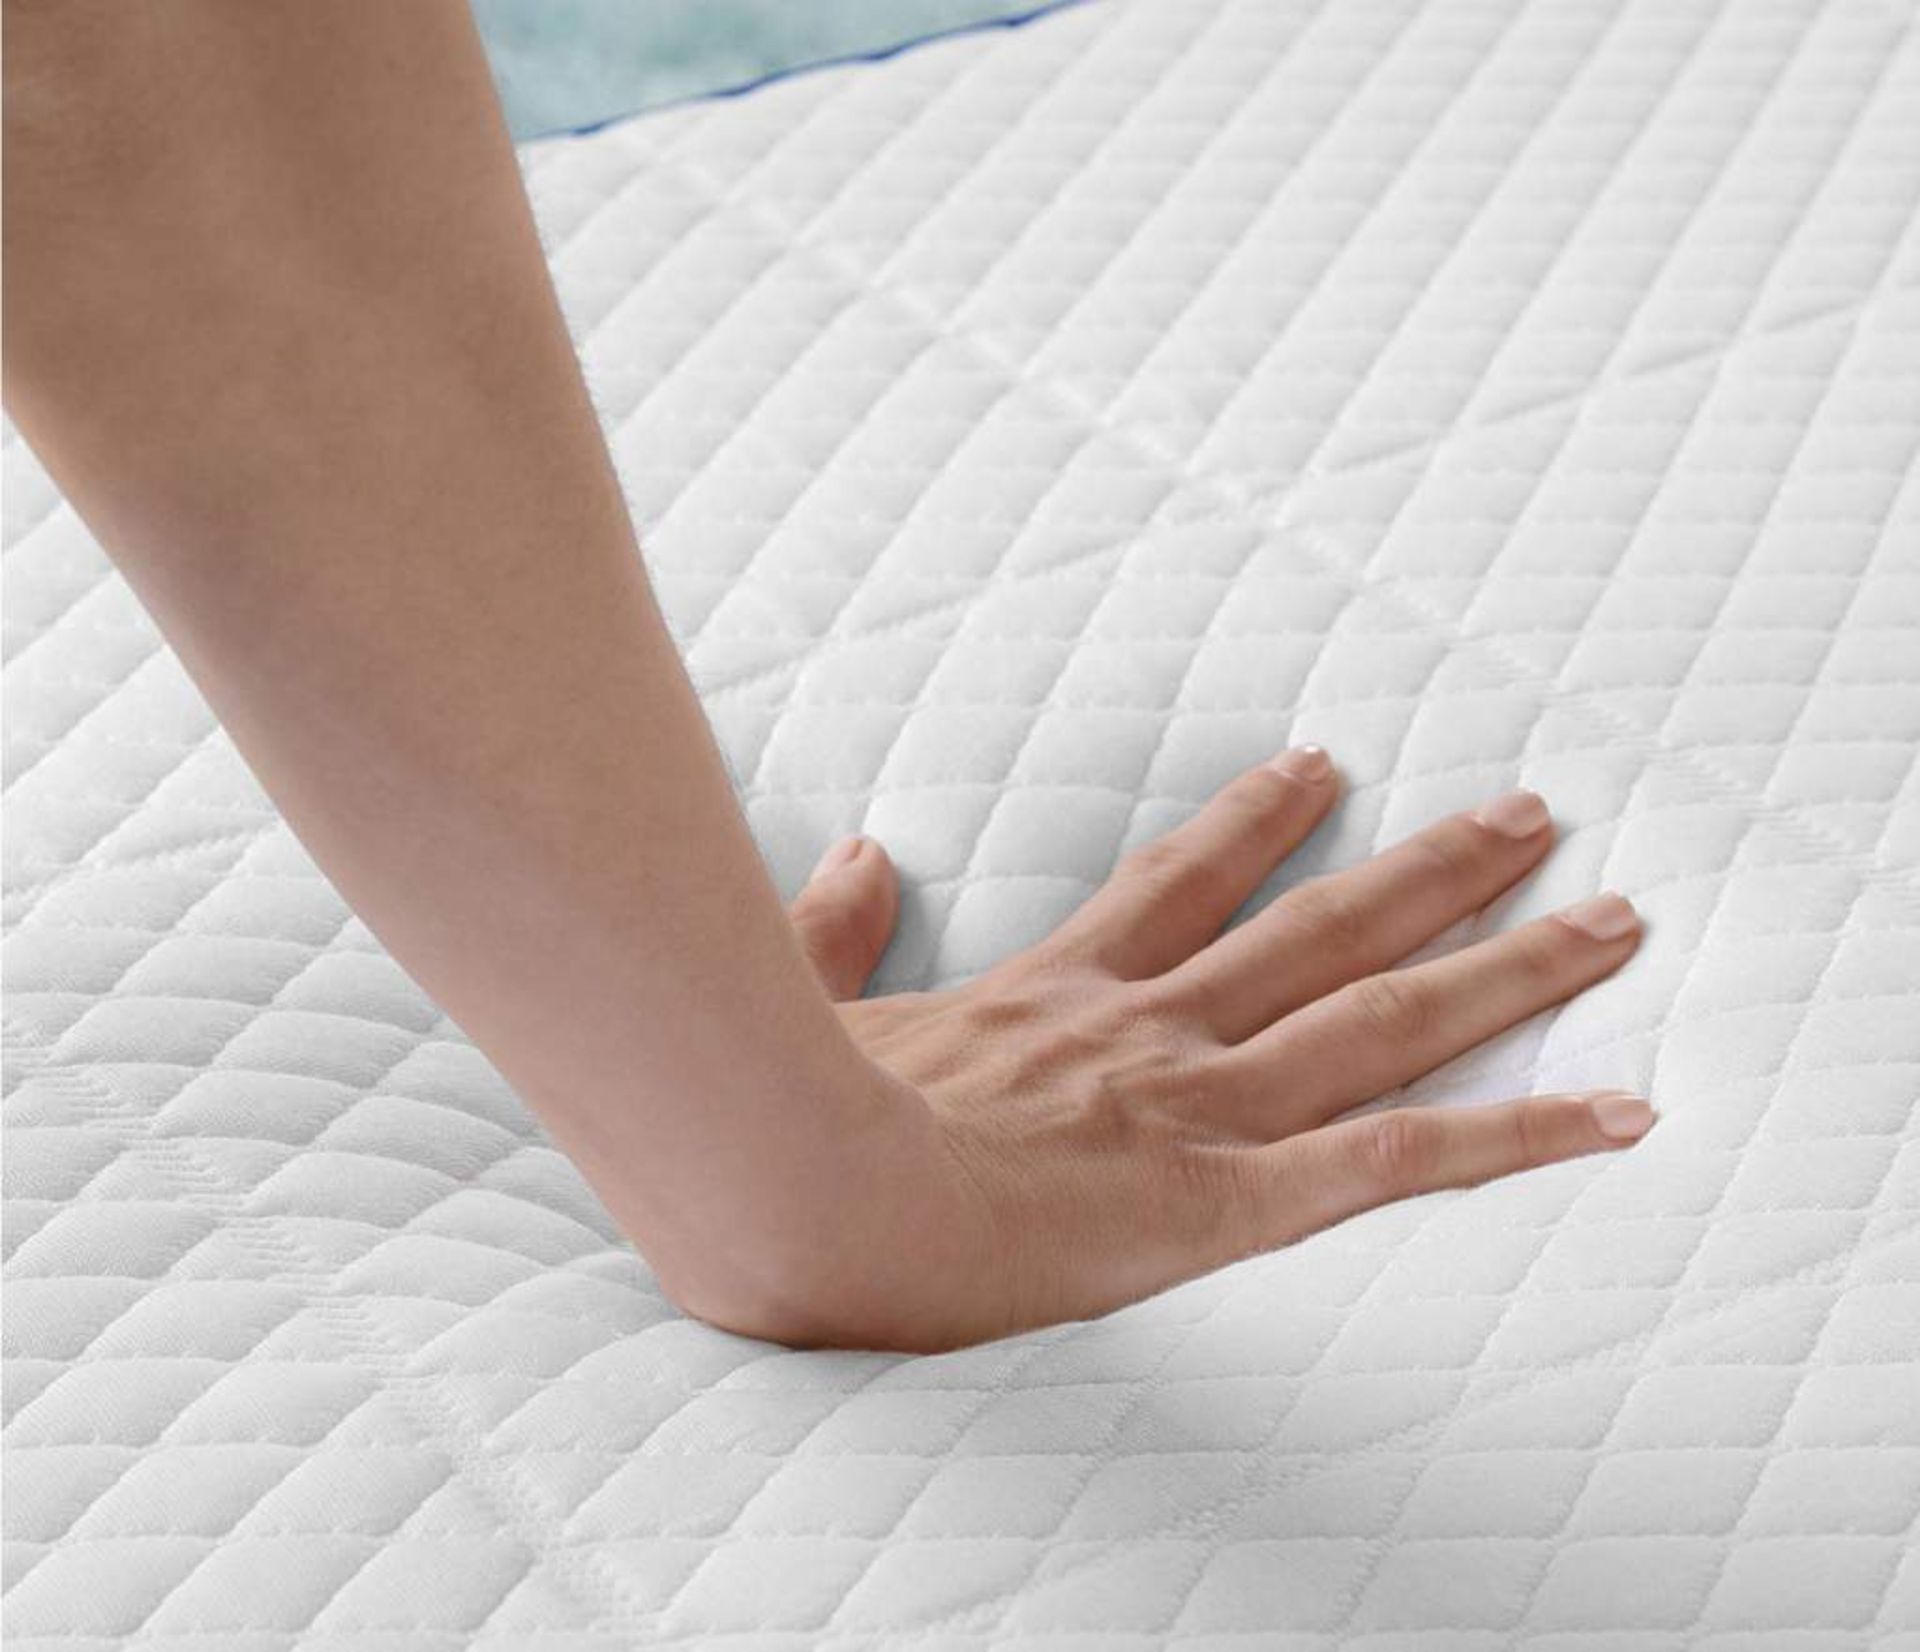 x1| 4ft 6 Nectar Professionally Refurbished Smart Pressure Relieving Memory Foam Mattress|RRP £569| - Image 2 of 2